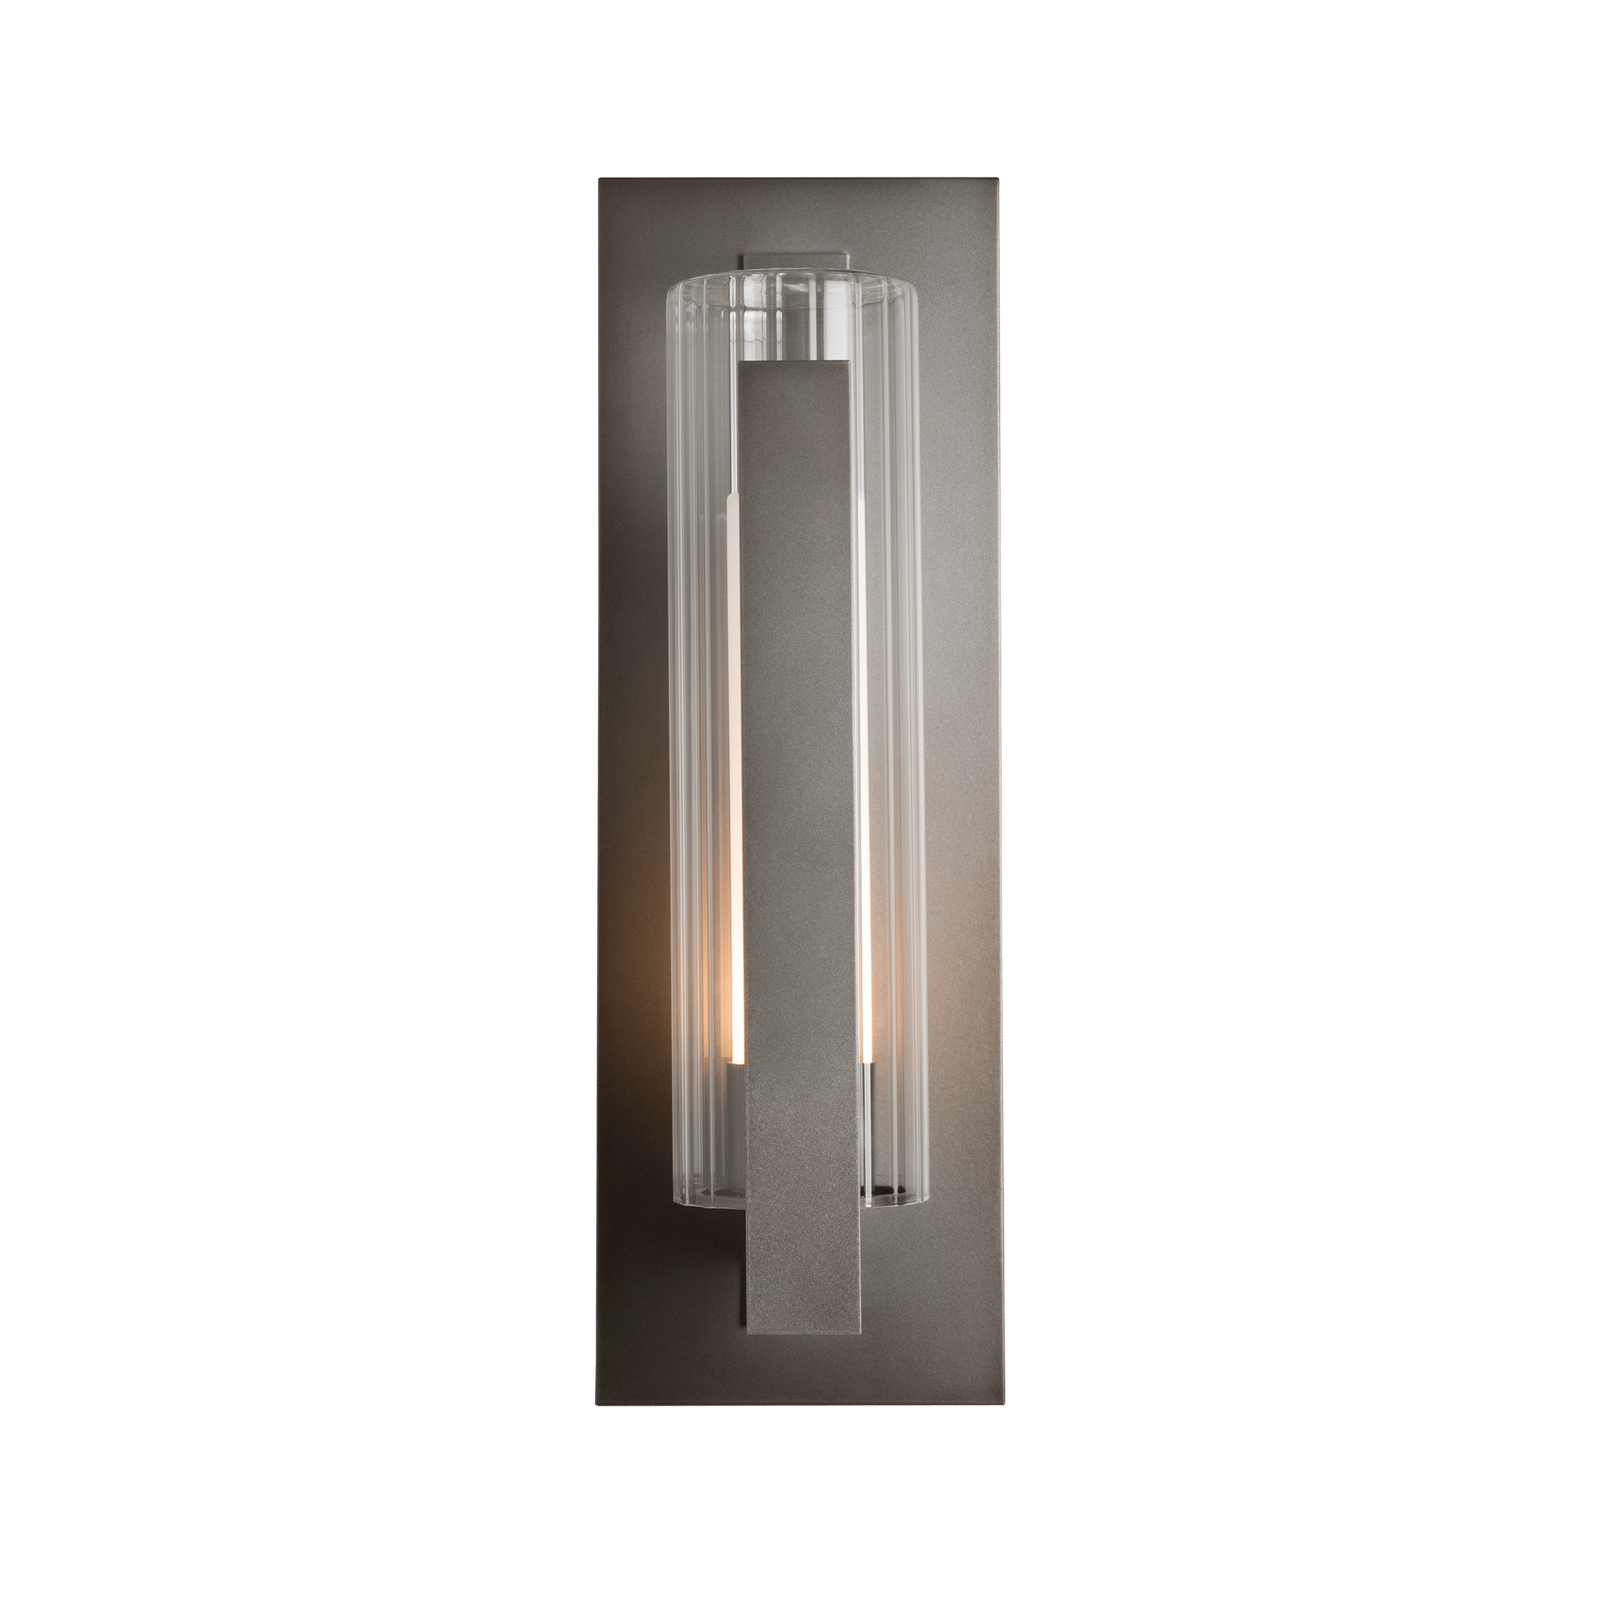 Hubbardton Forge Vertical Bar Fluted Glass Large Outdoor Sconce